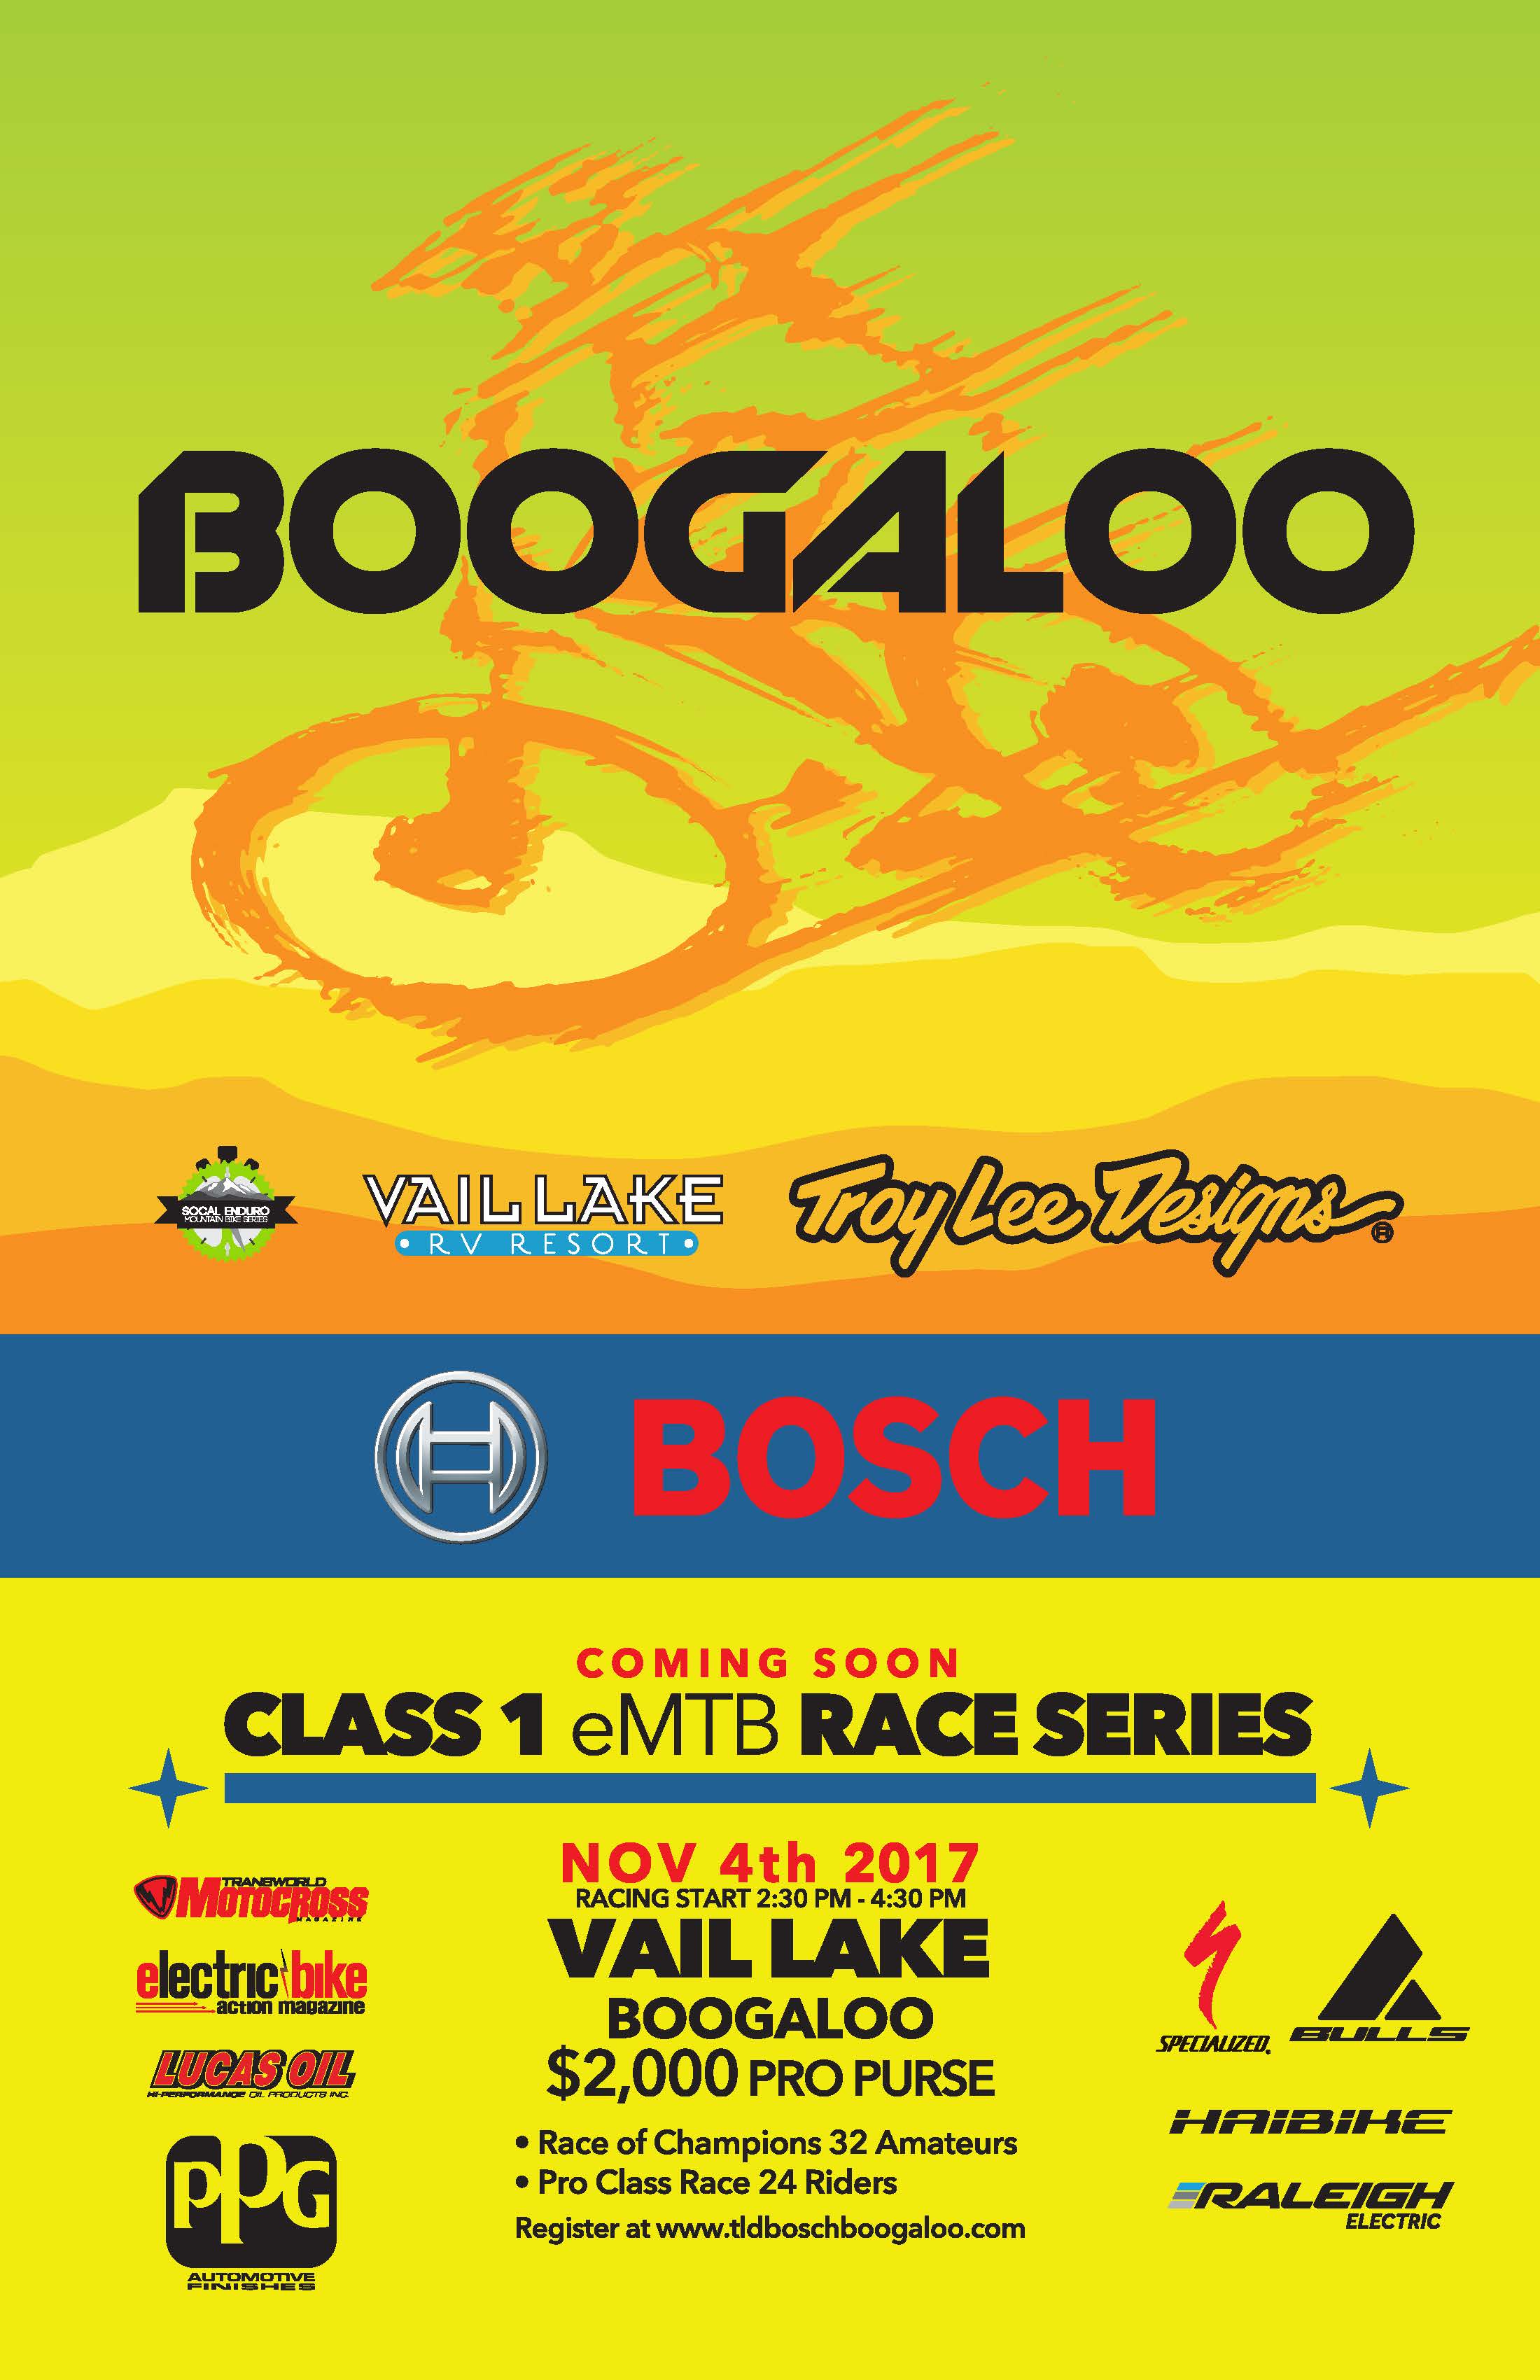 Troy Lee Designs and Bosch Boogaloo eMTB race makes second stop in Temecula this weekend